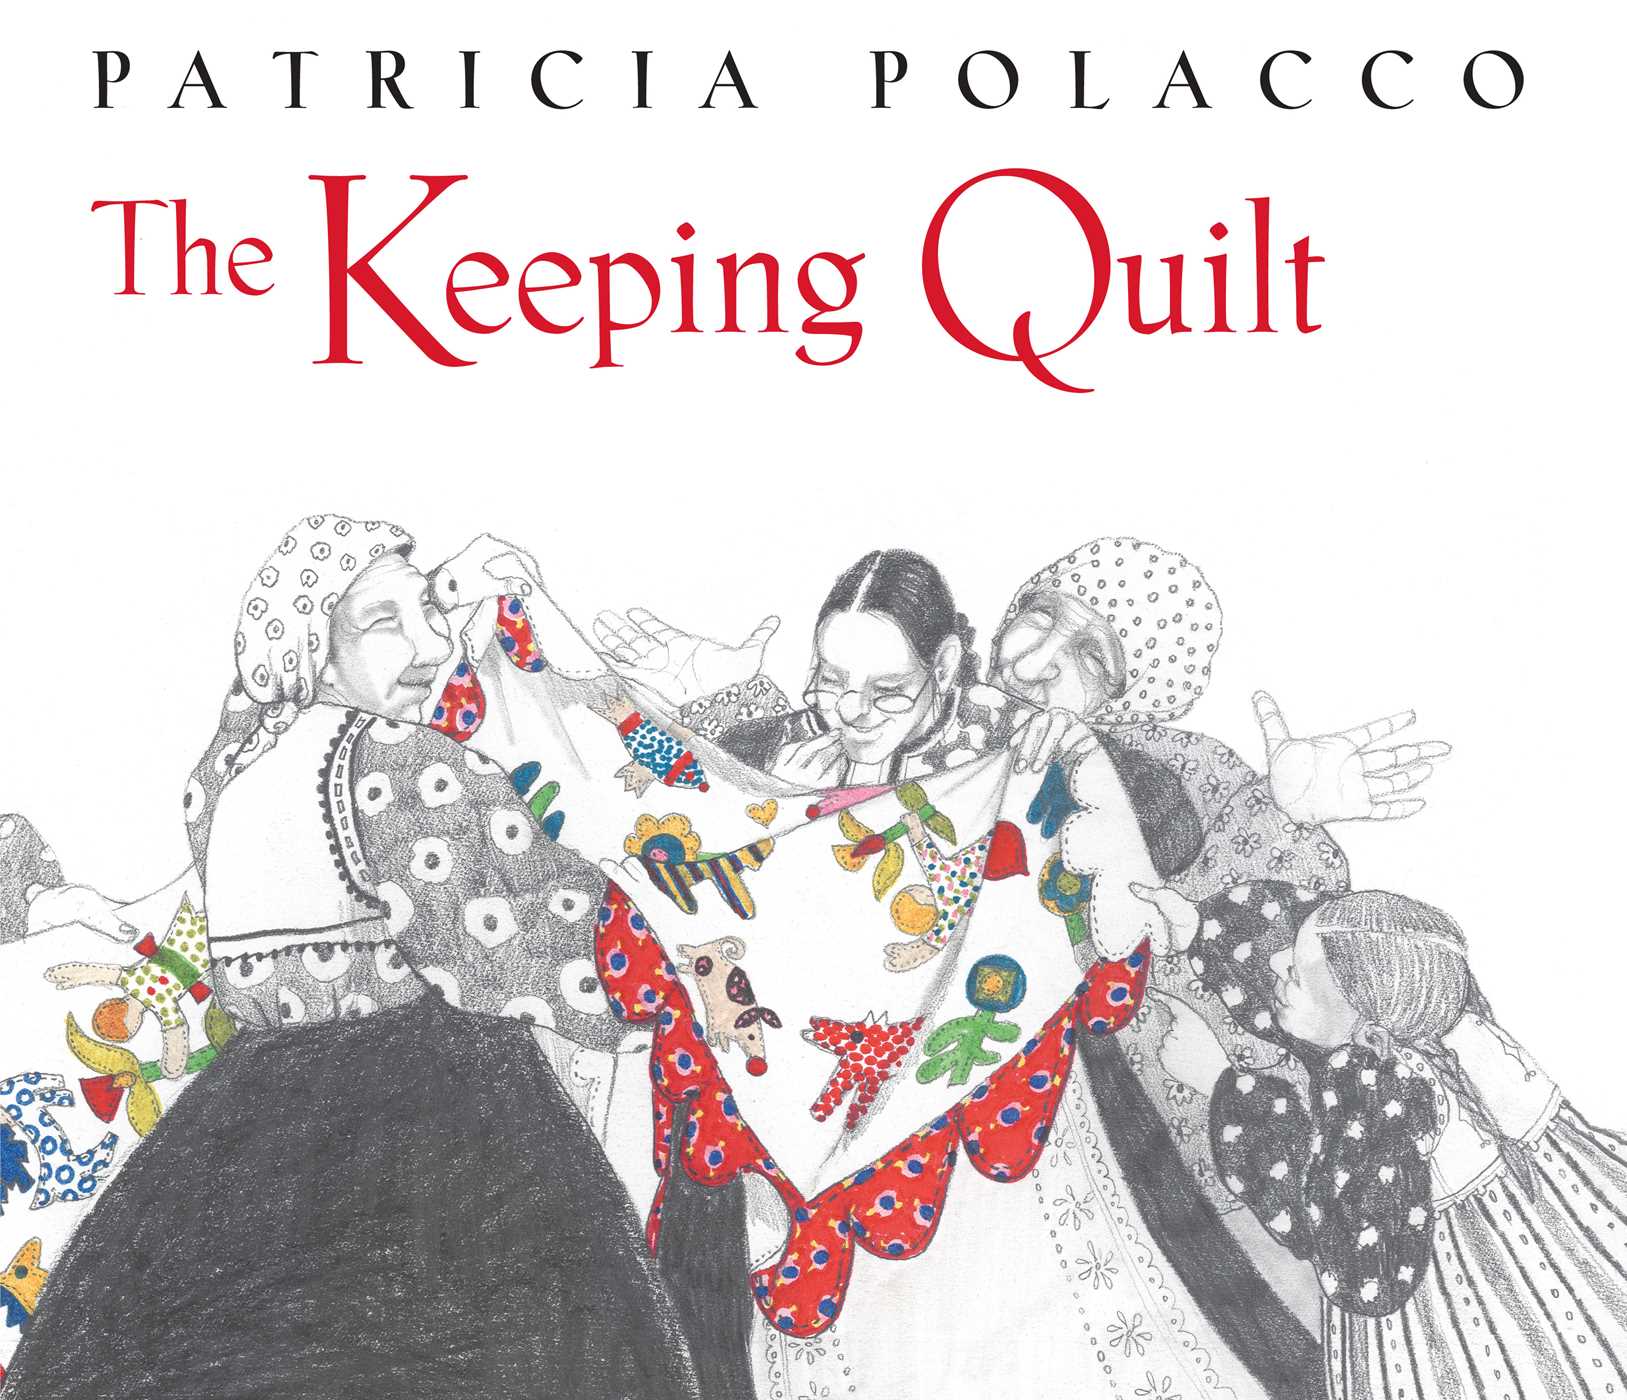 A book cover, titles The Keeping Quilt